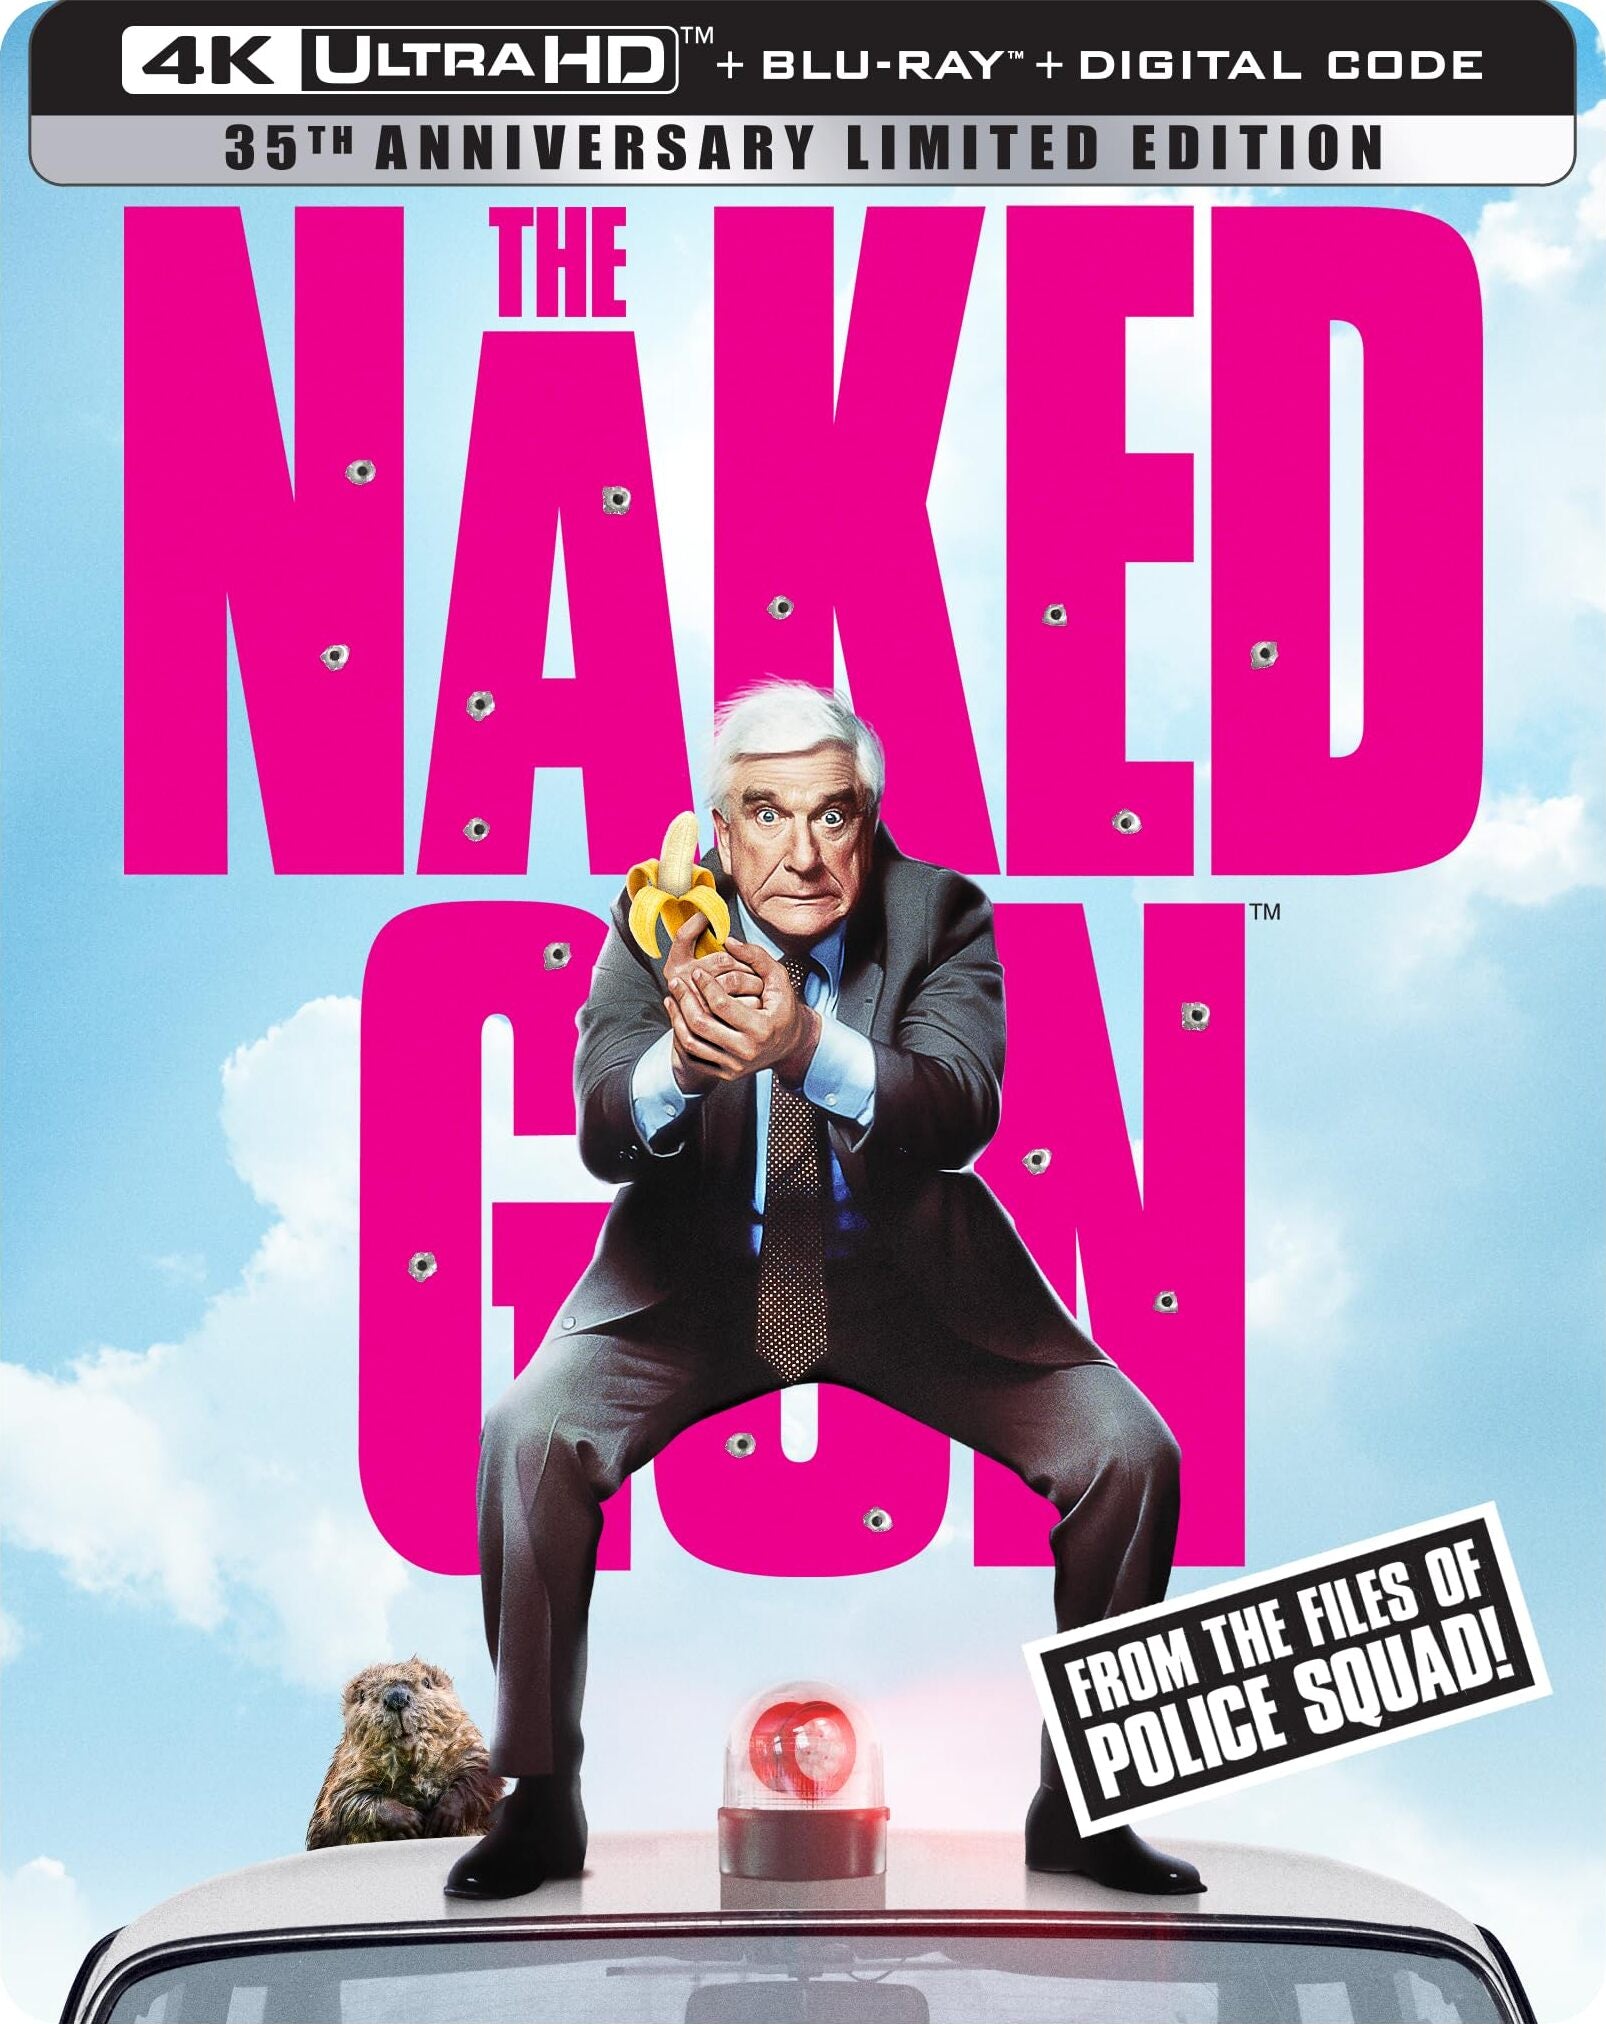 THE NAKED GUN: FROM THE FILES OF POLICE SQUAD (LIMITED EDITION) 4K UHD/BLU-RAY STEELBOOK